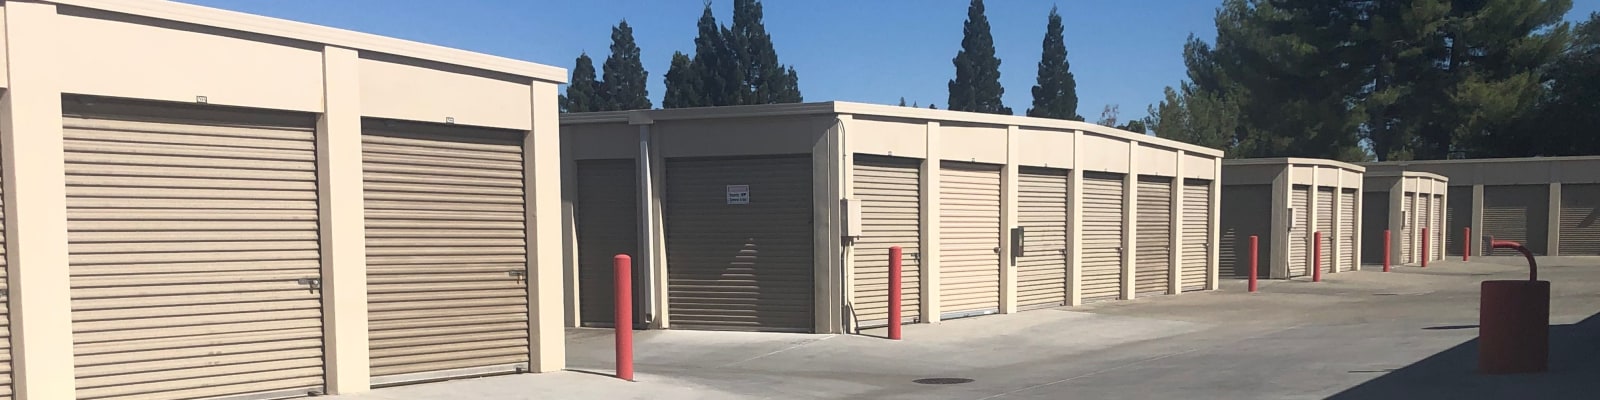 Accessibility statement at Gold Country Self Storage in Folsom, California. 